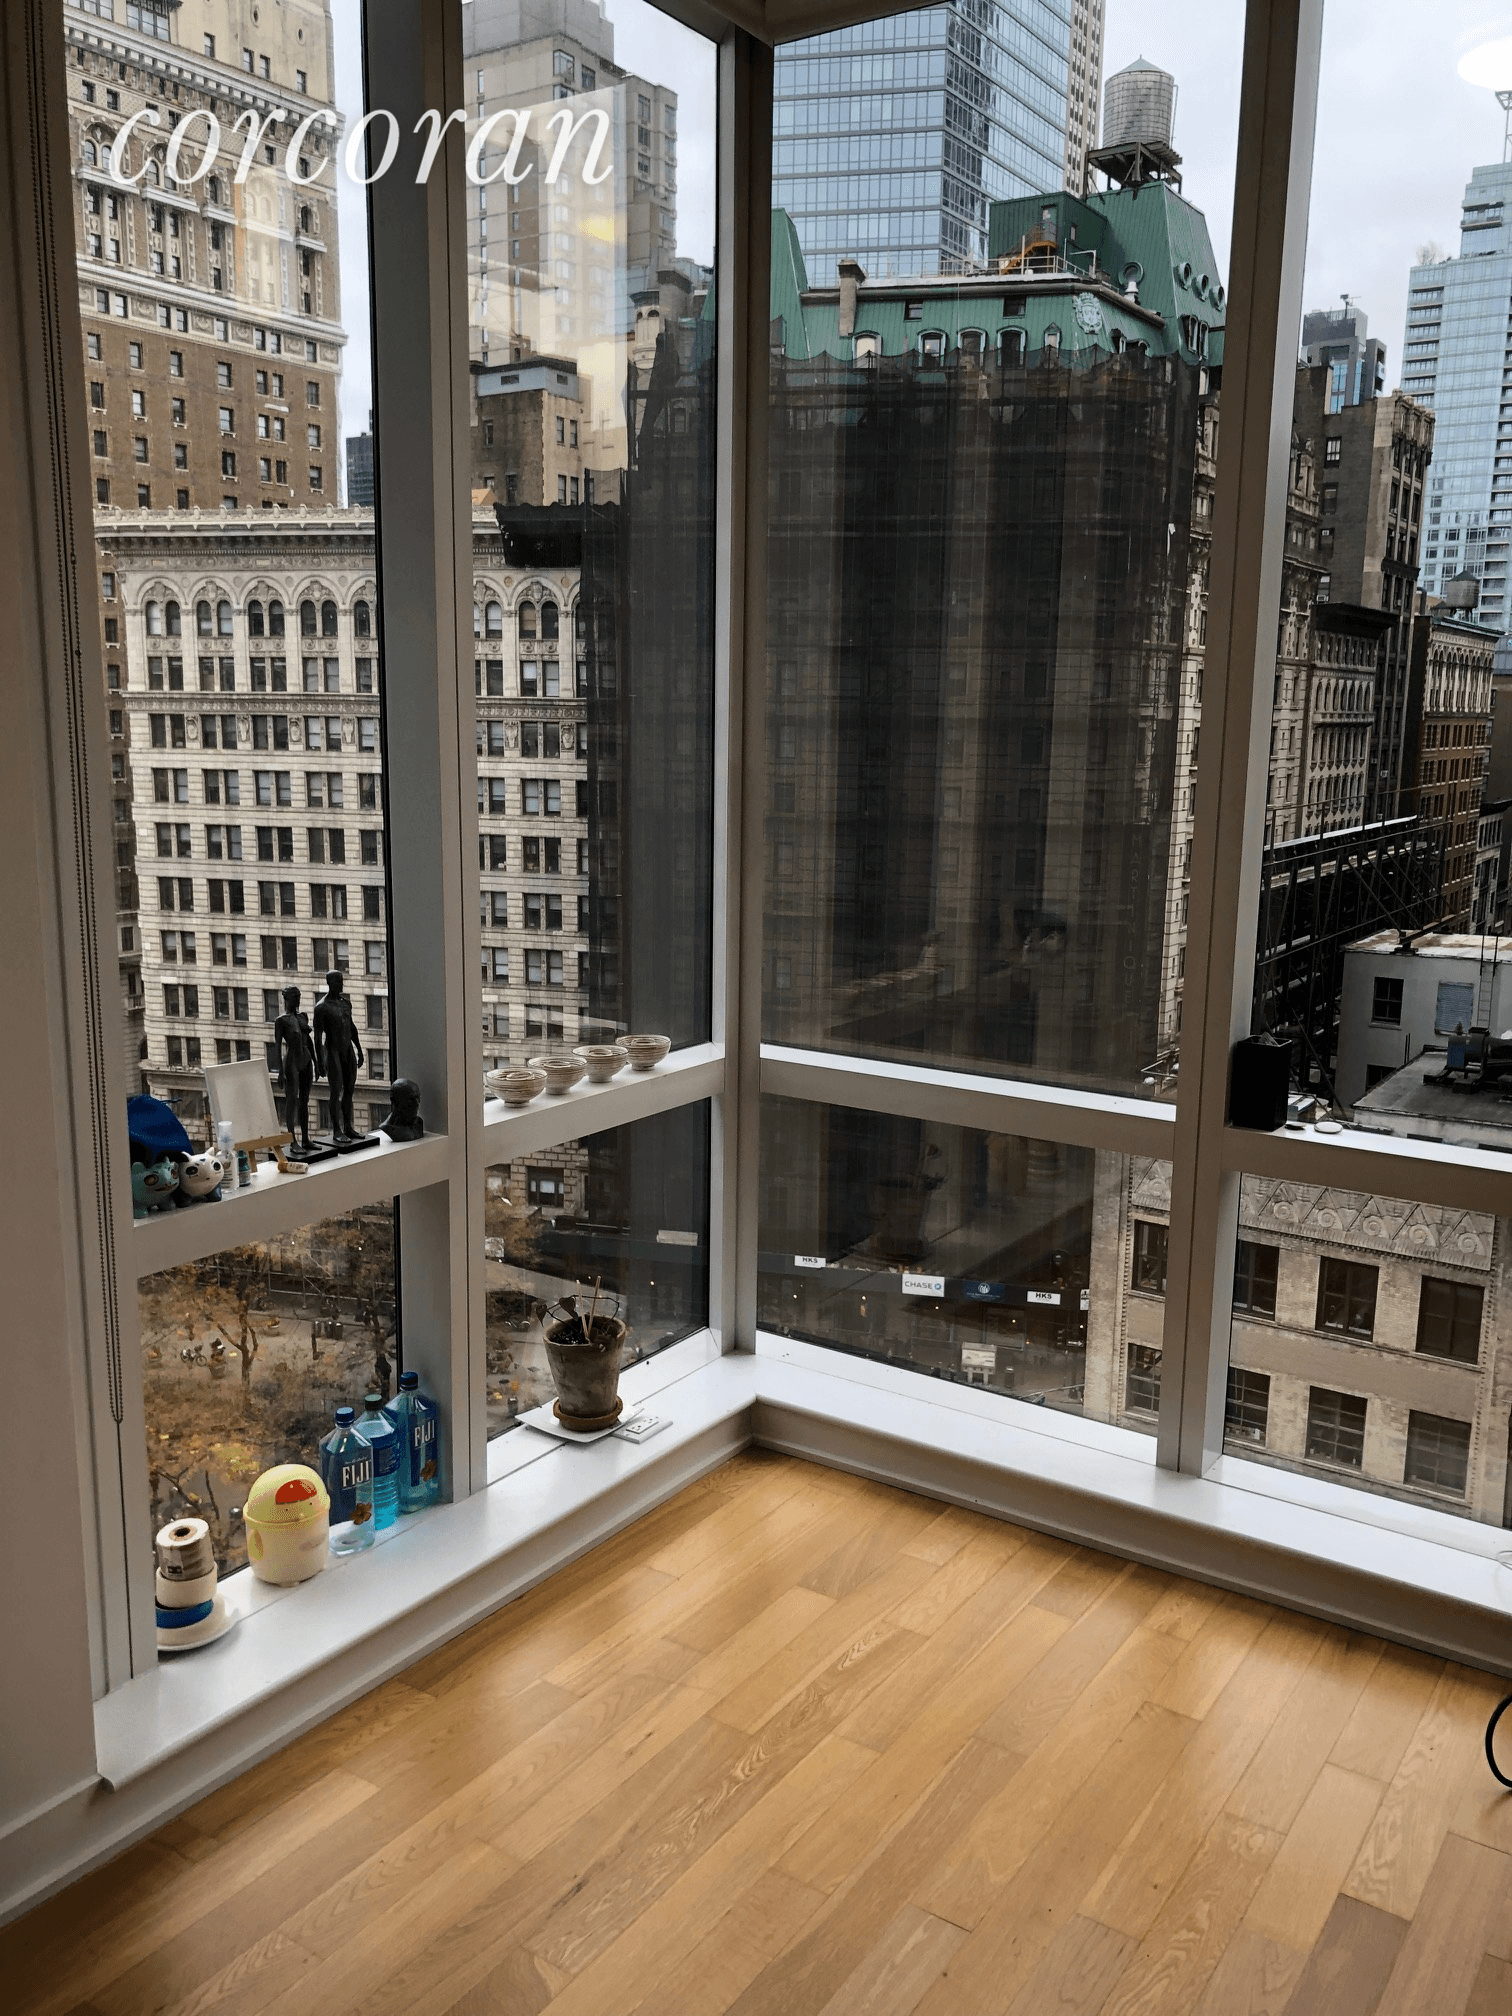 Located on the 14th floor of The Continental, this north amp ; east facing corner studio with floor to ceiling windows, fabulous views and beautiful finishes is a must see.